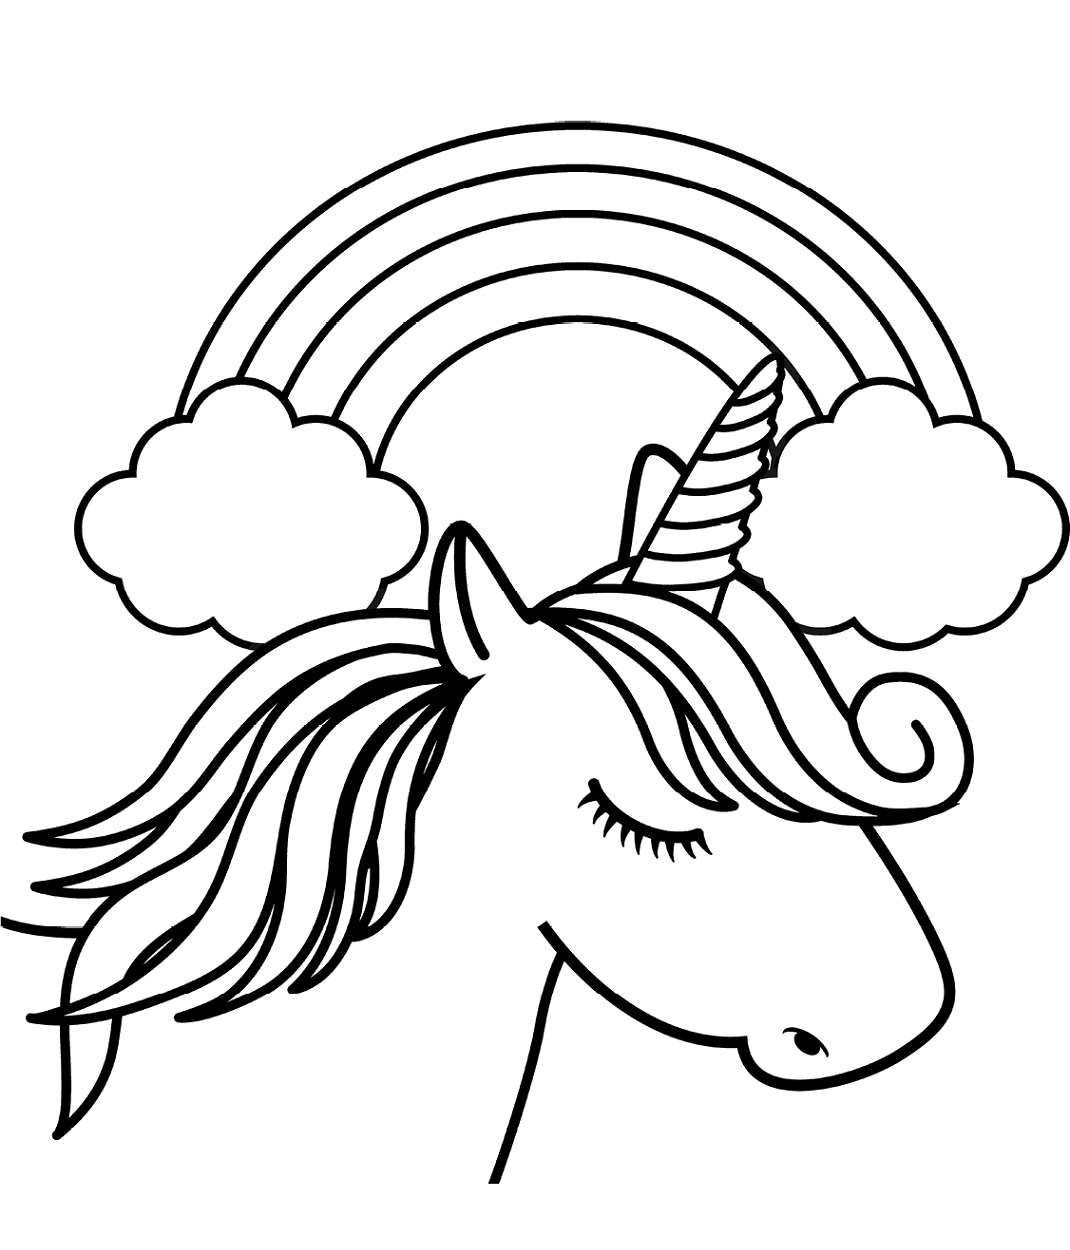 Printable Unicorn Head Coloring Pages